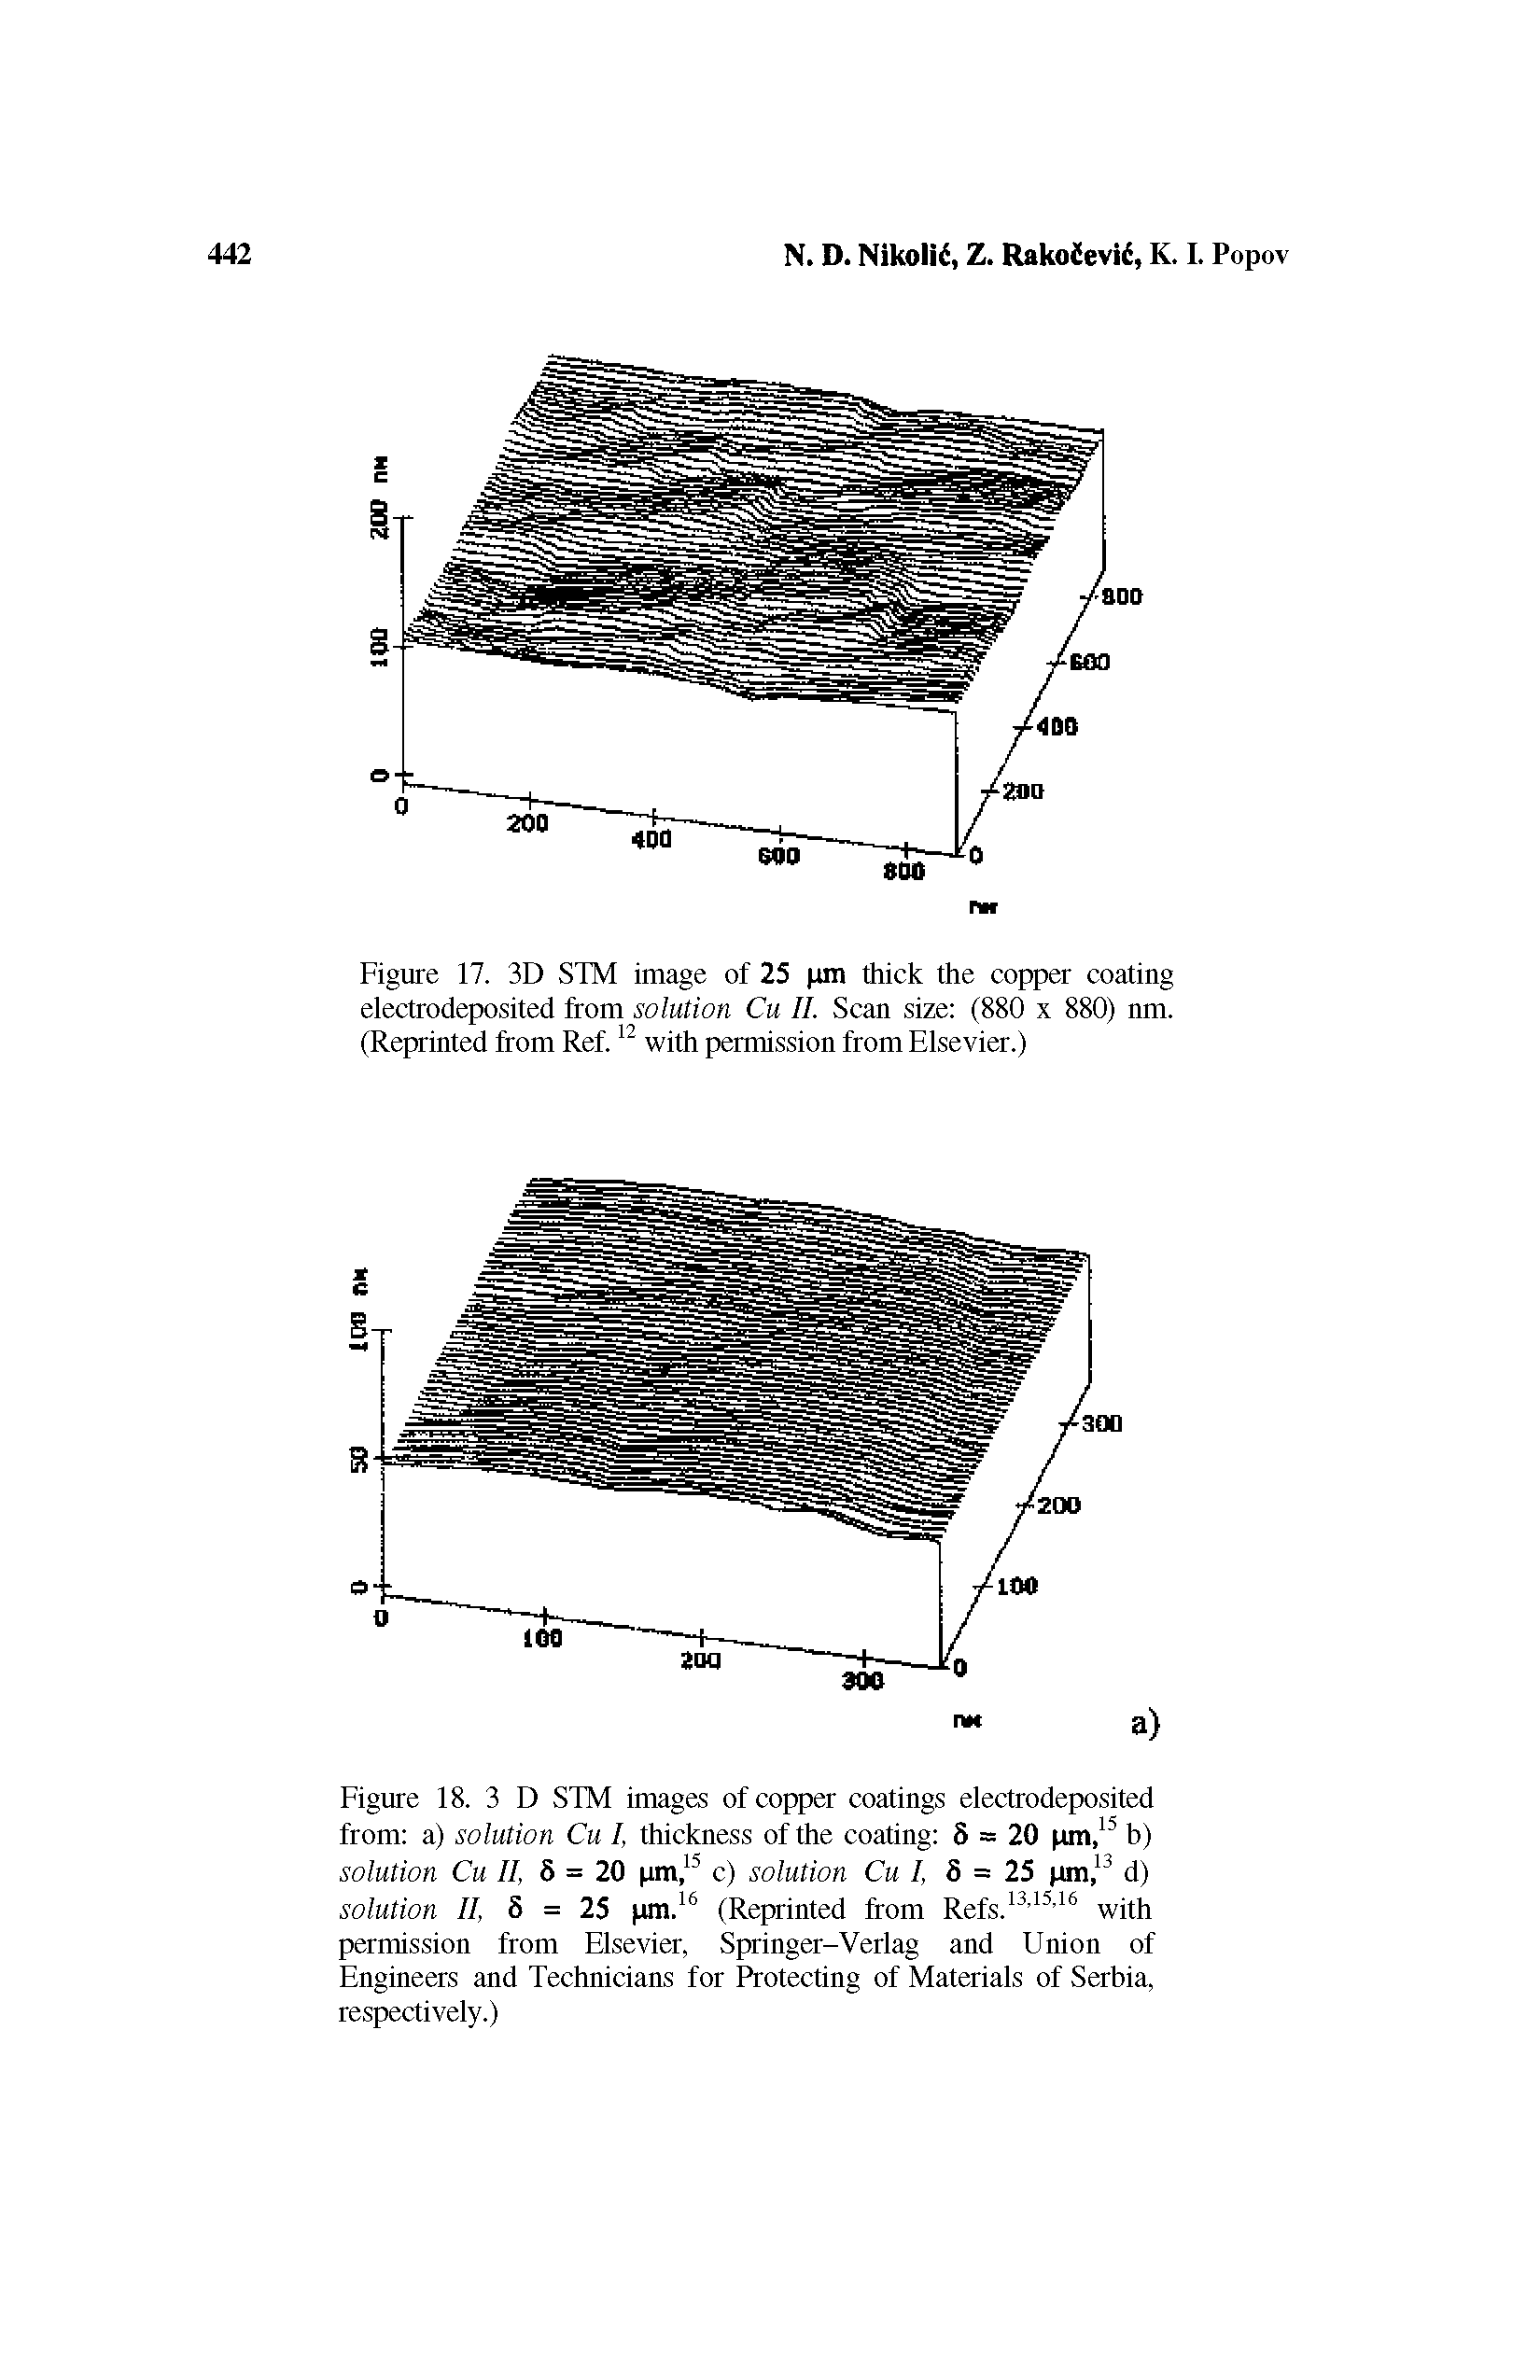 Figure 18. 3 D STM images of copper coatings electrodeposited from a) solution Cu I, thickness of the coating 8 = 20 pm,15 b) solution Cu II, 8 = 20 pm,15 c) solution Cu I, 8 = 25 pm,13 d) solution II, 8 = 25 pm.16 (Reprinted from Refs.131516 with permission from Elsevier, Springer-Verlag and Union of Engineers and Technicians for Protecting of Materials of Serbia, respectively.)...